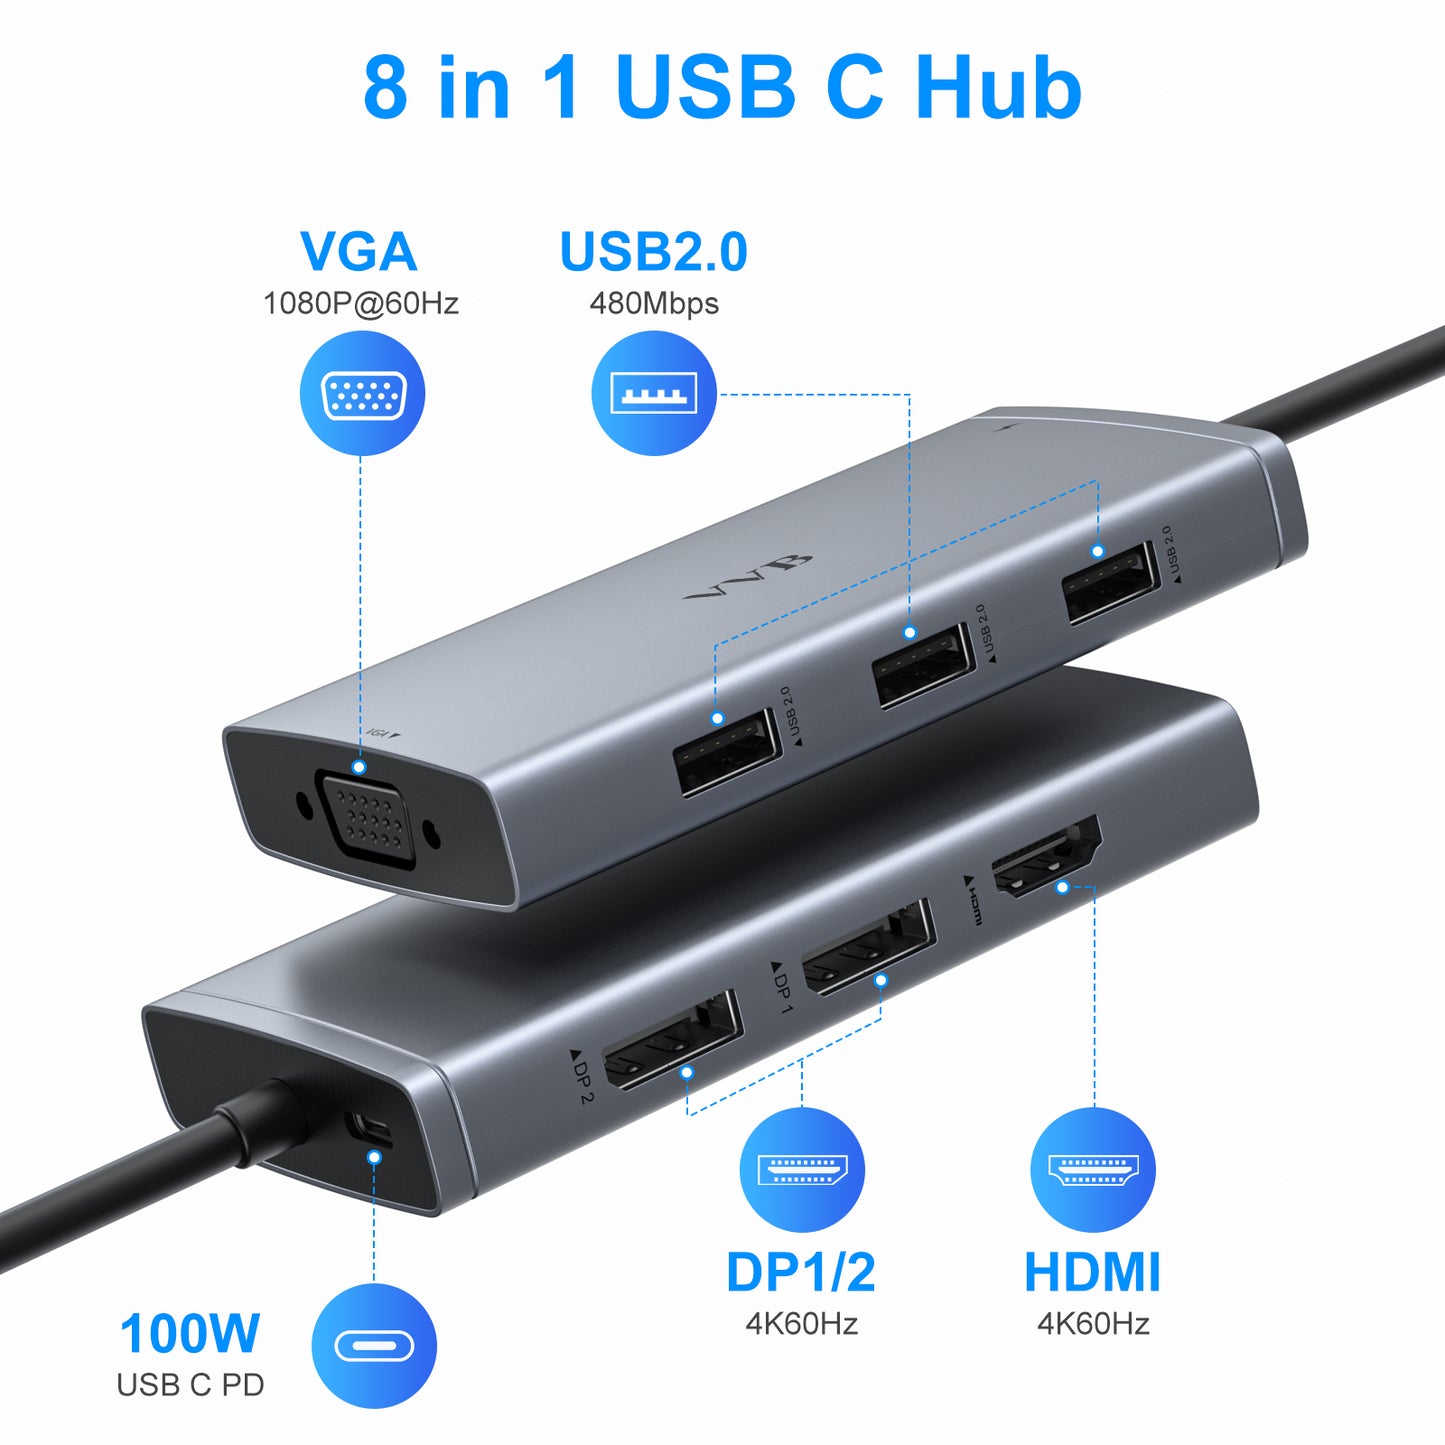 USB C Docking Station Dual Displayport Monitor for Dell/Lenovo/HP Laptop,Quadruple Display USB-C Hub Multiple Monitor Adapter Dongle with 2 Display ports DP+HDMI+VGA+100W Type C PD Charging+3USB A 2.0